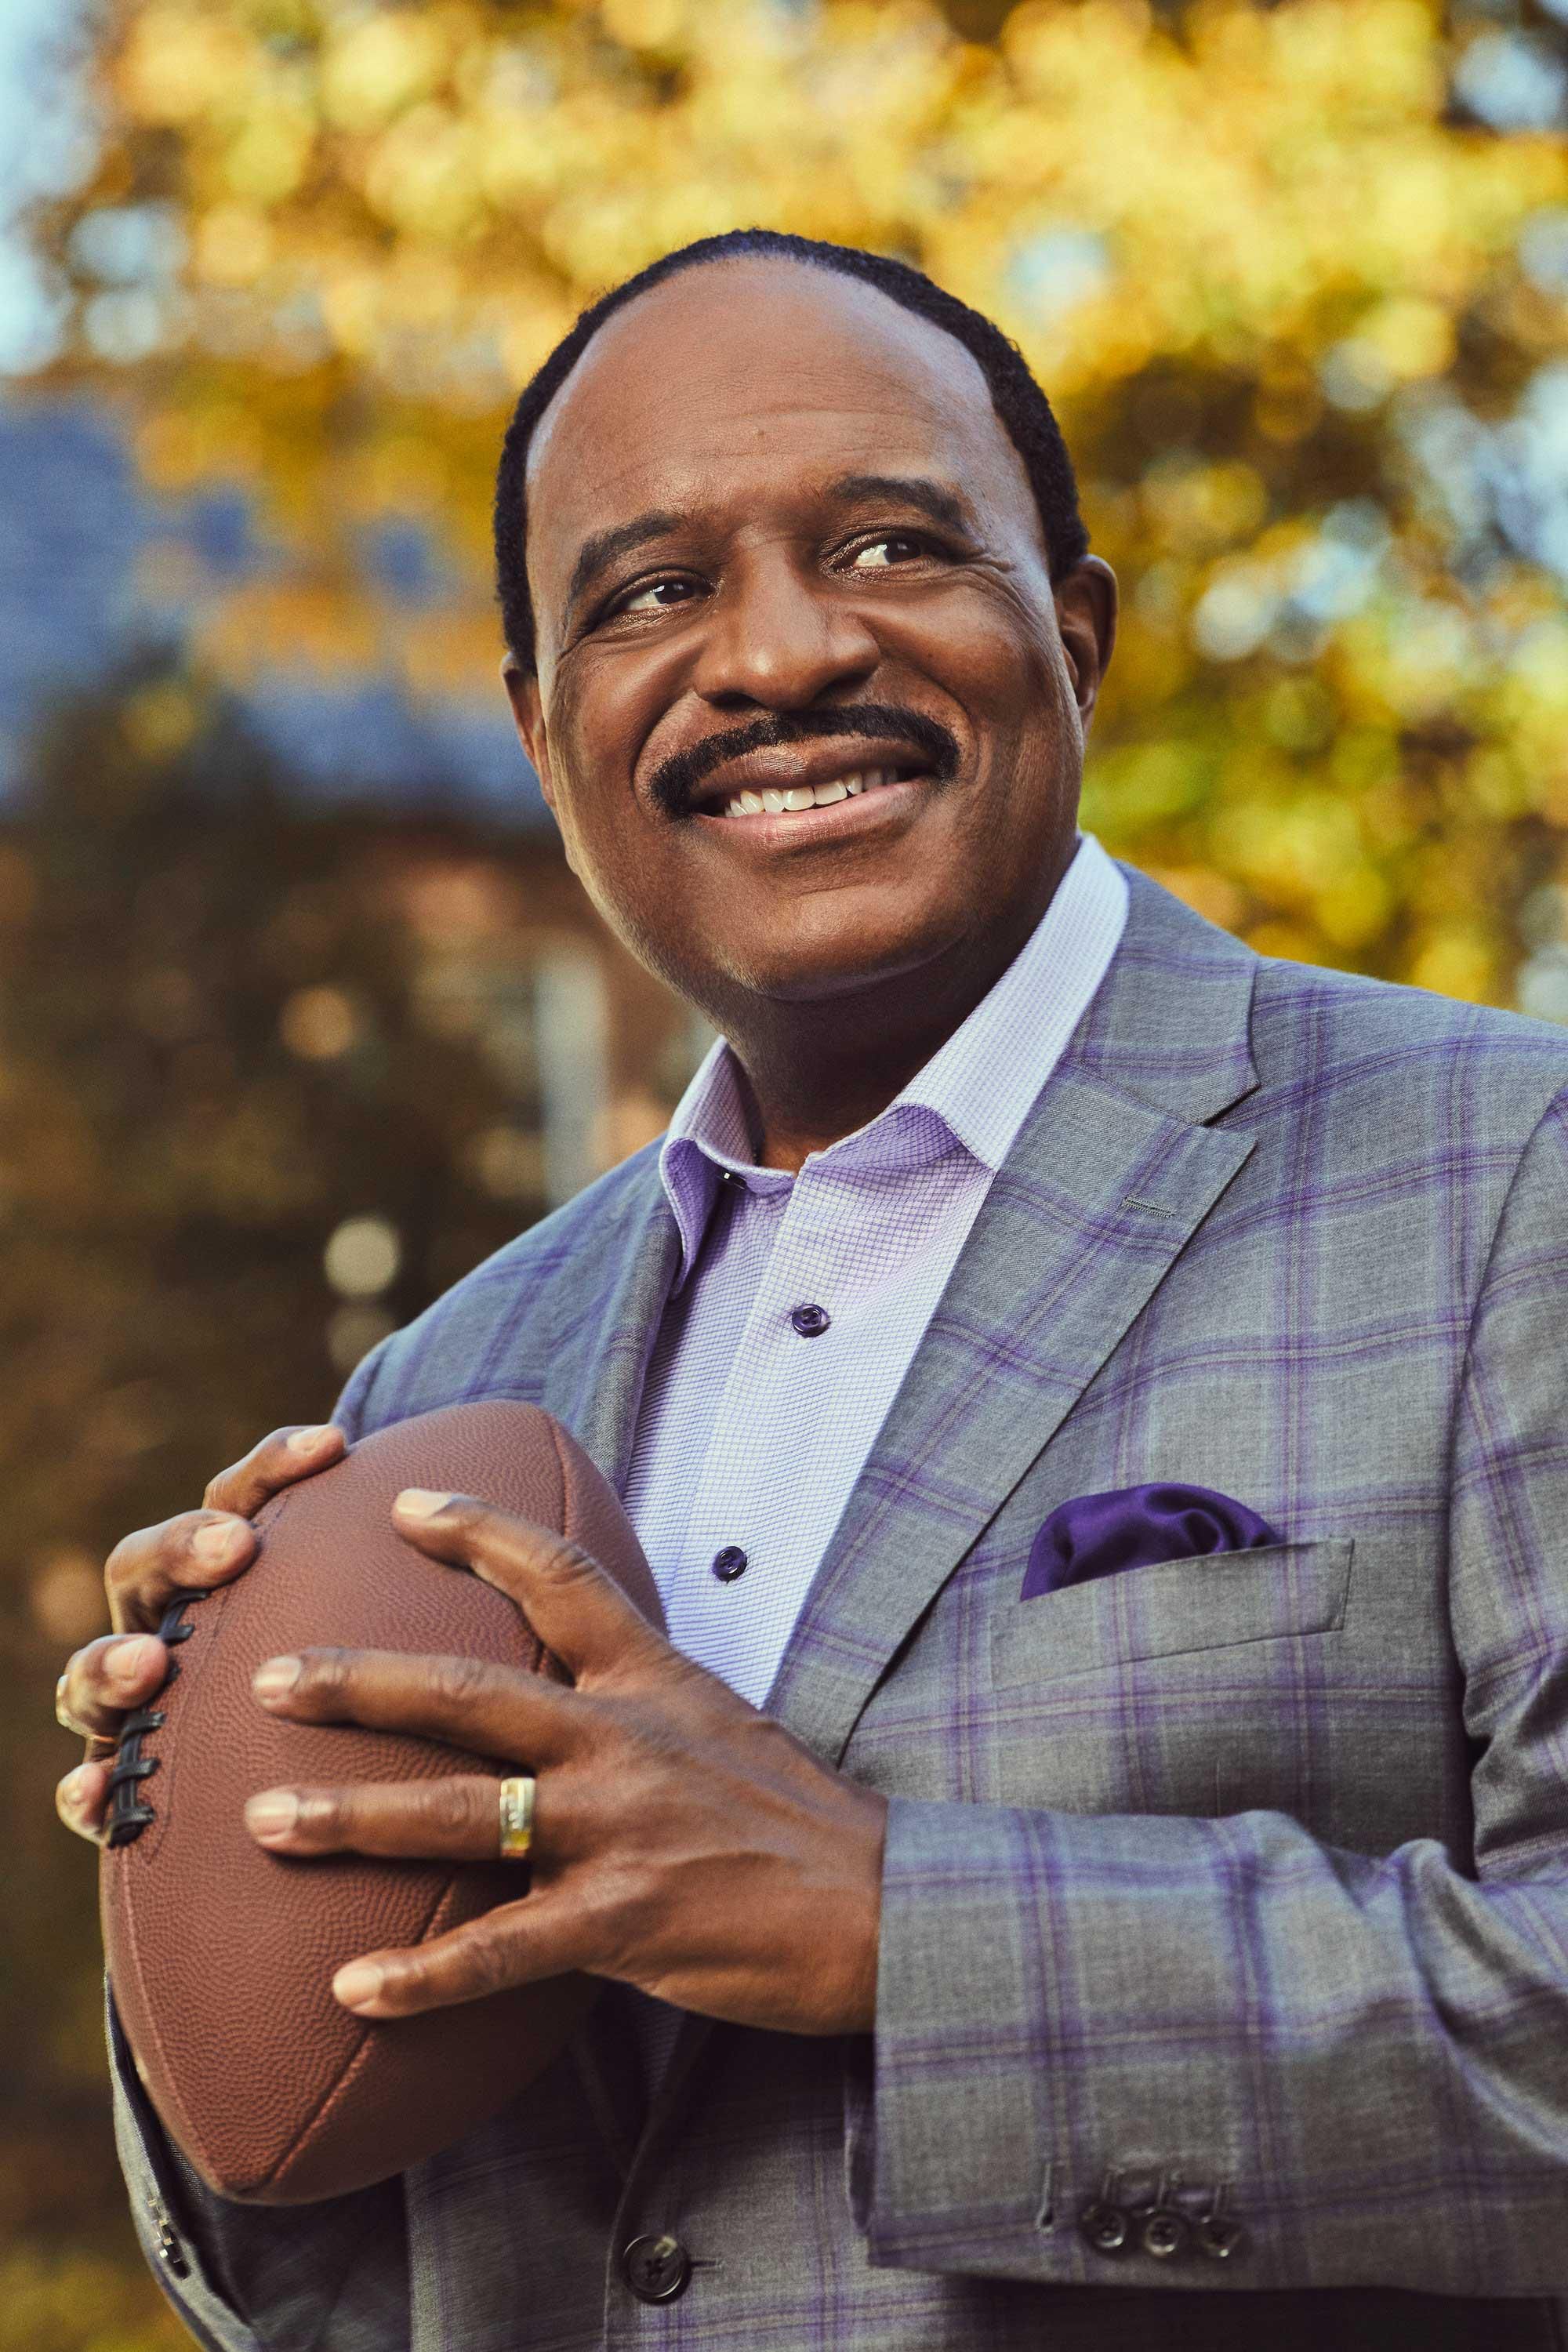 The NFL Today's host James Brown poses in a park with a football and a grin.